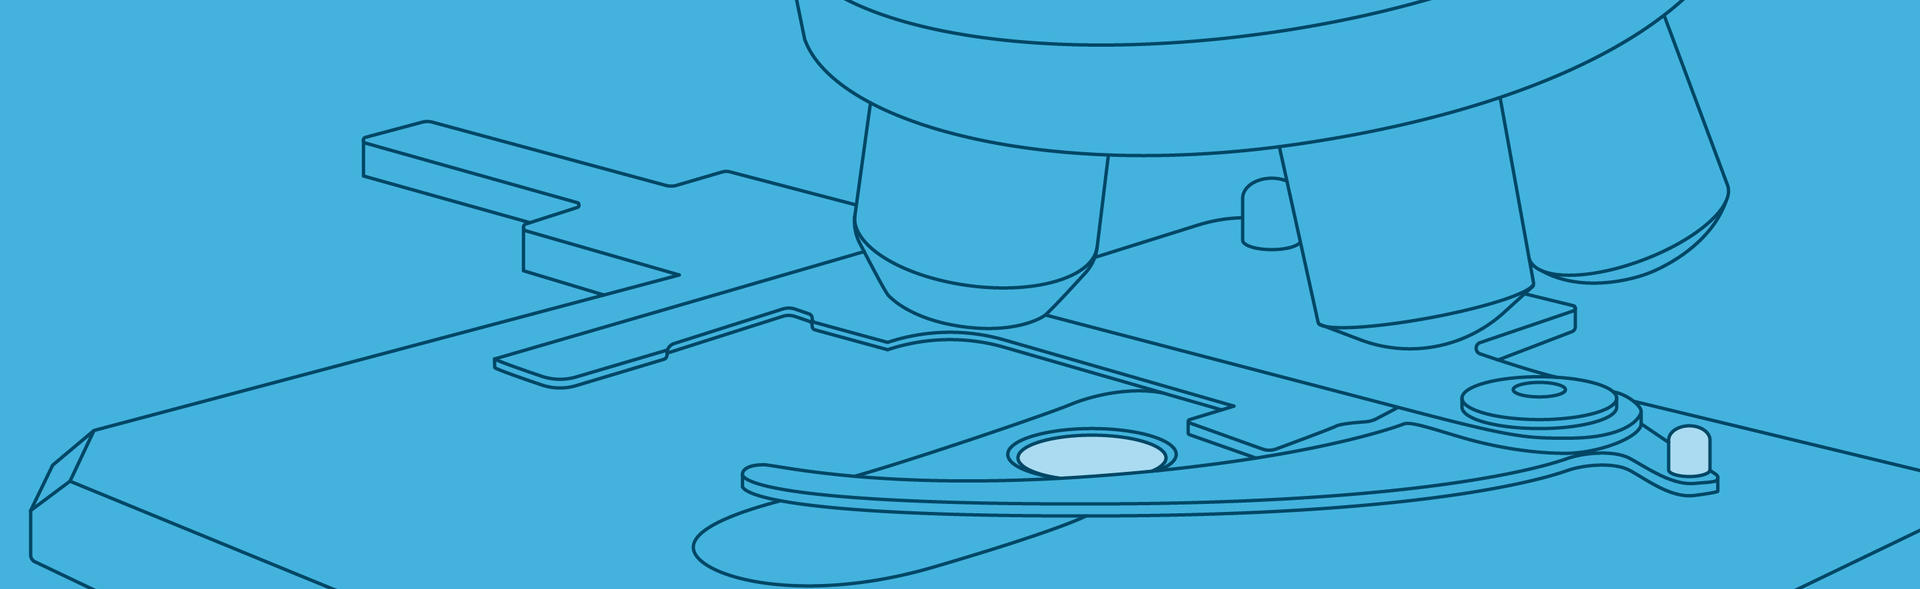 Illustration close up of a microscope.